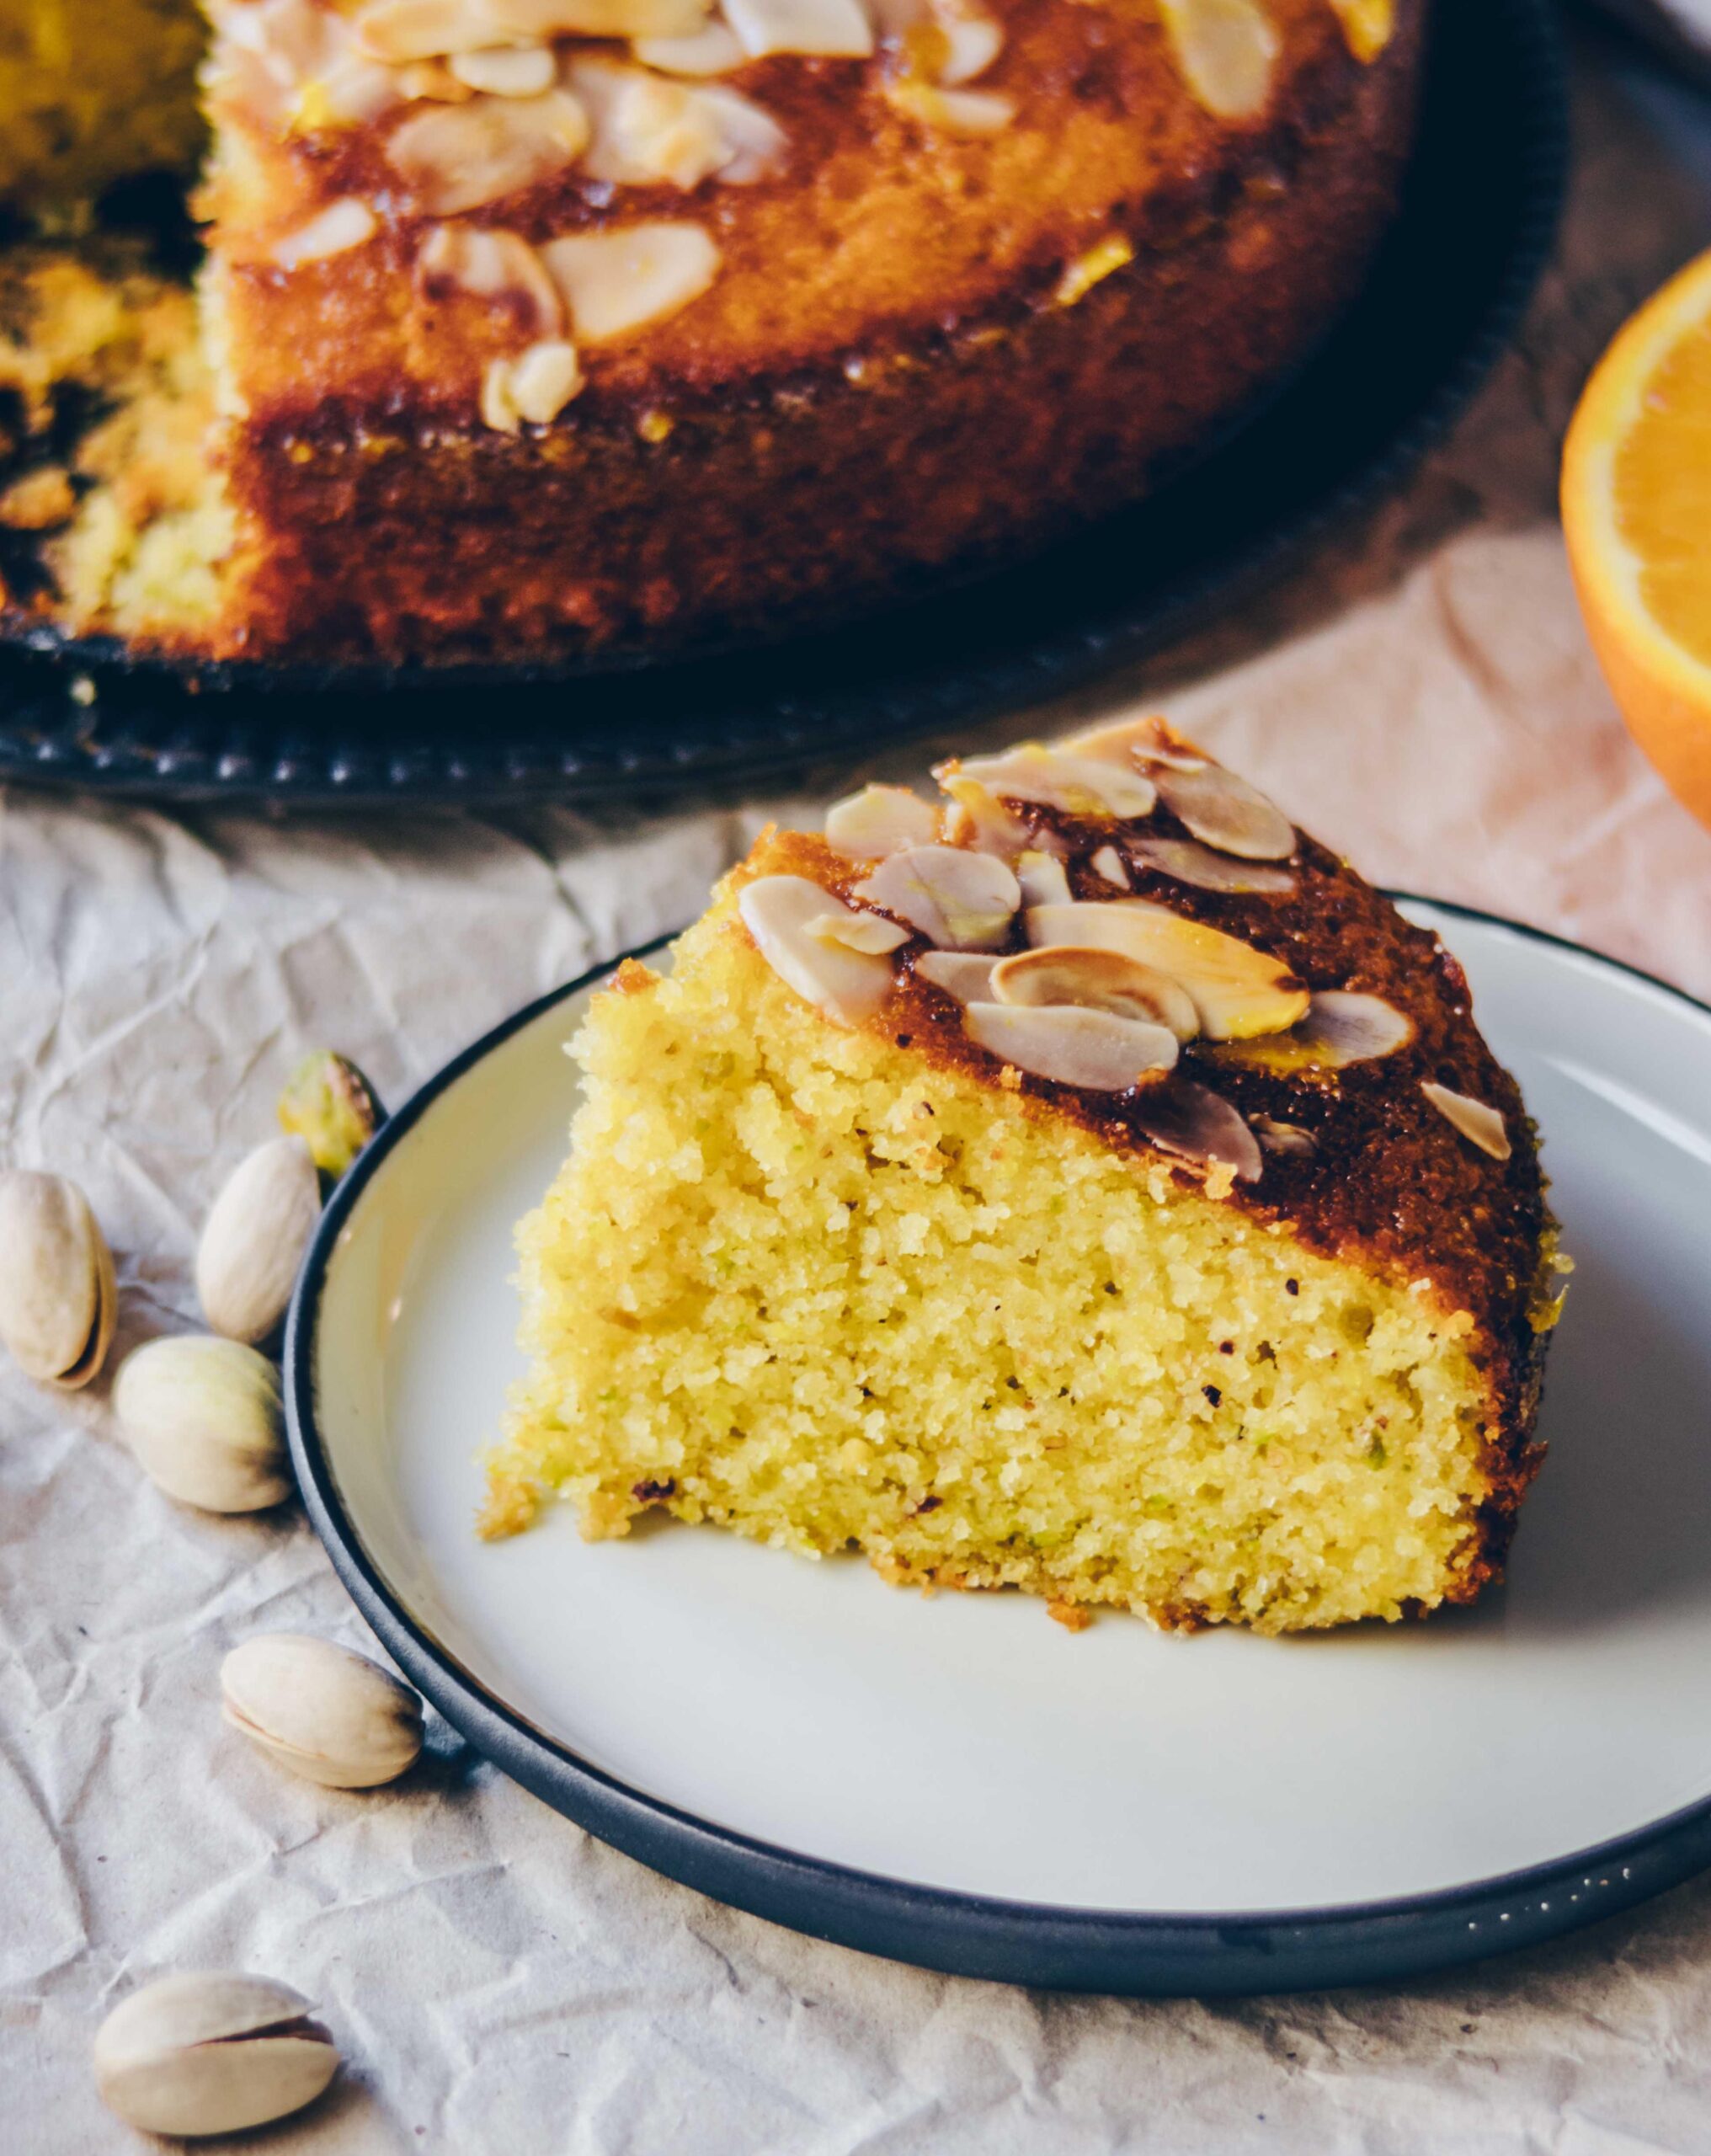  This cake is not too sweet, but perfectly balanced with a delightful citrus flavor